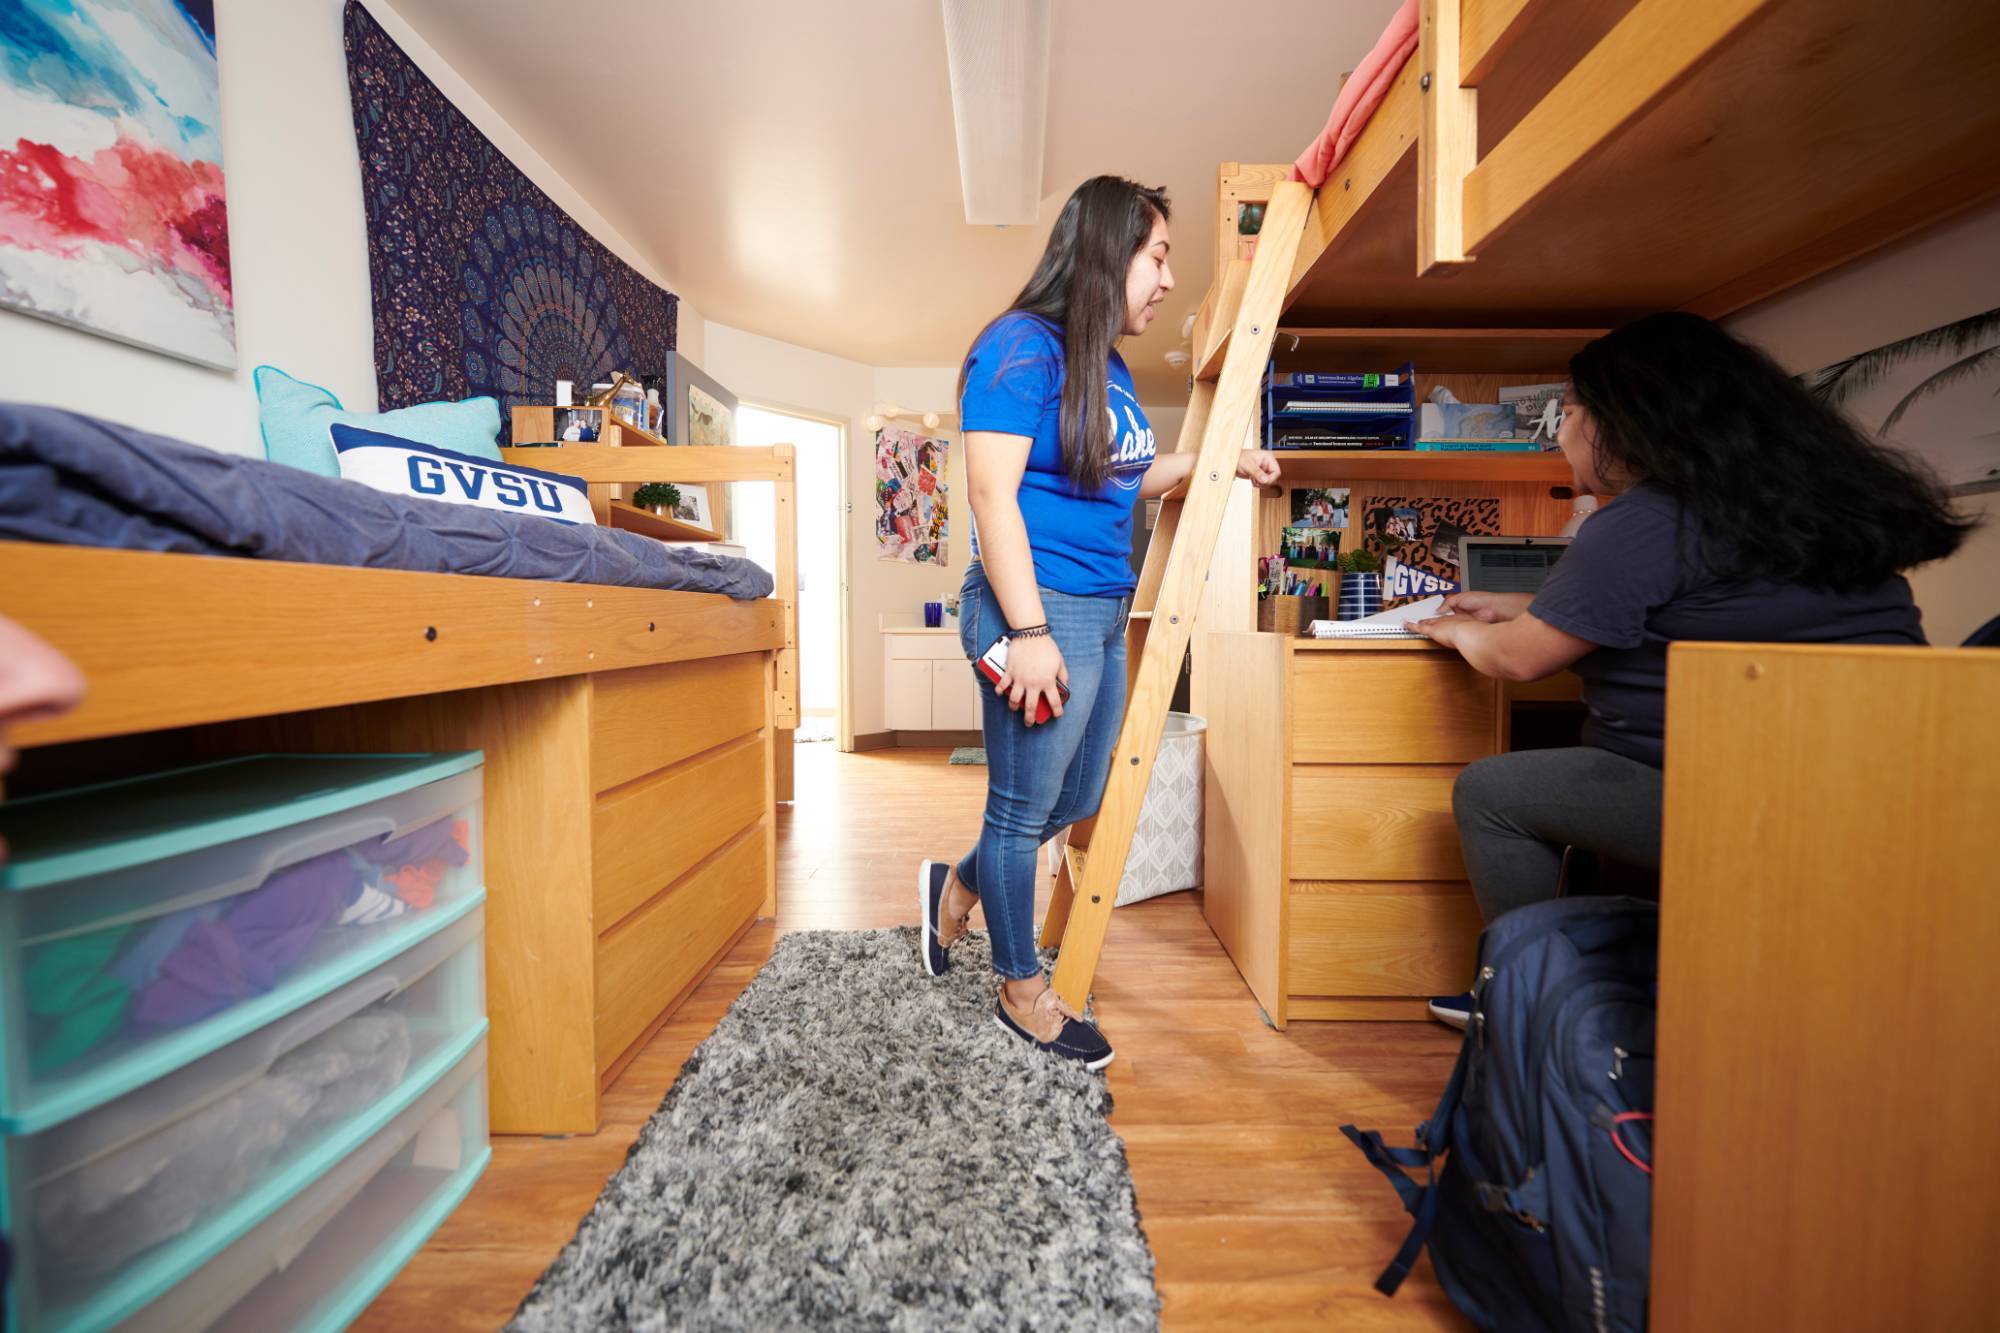 Students in a suite style room